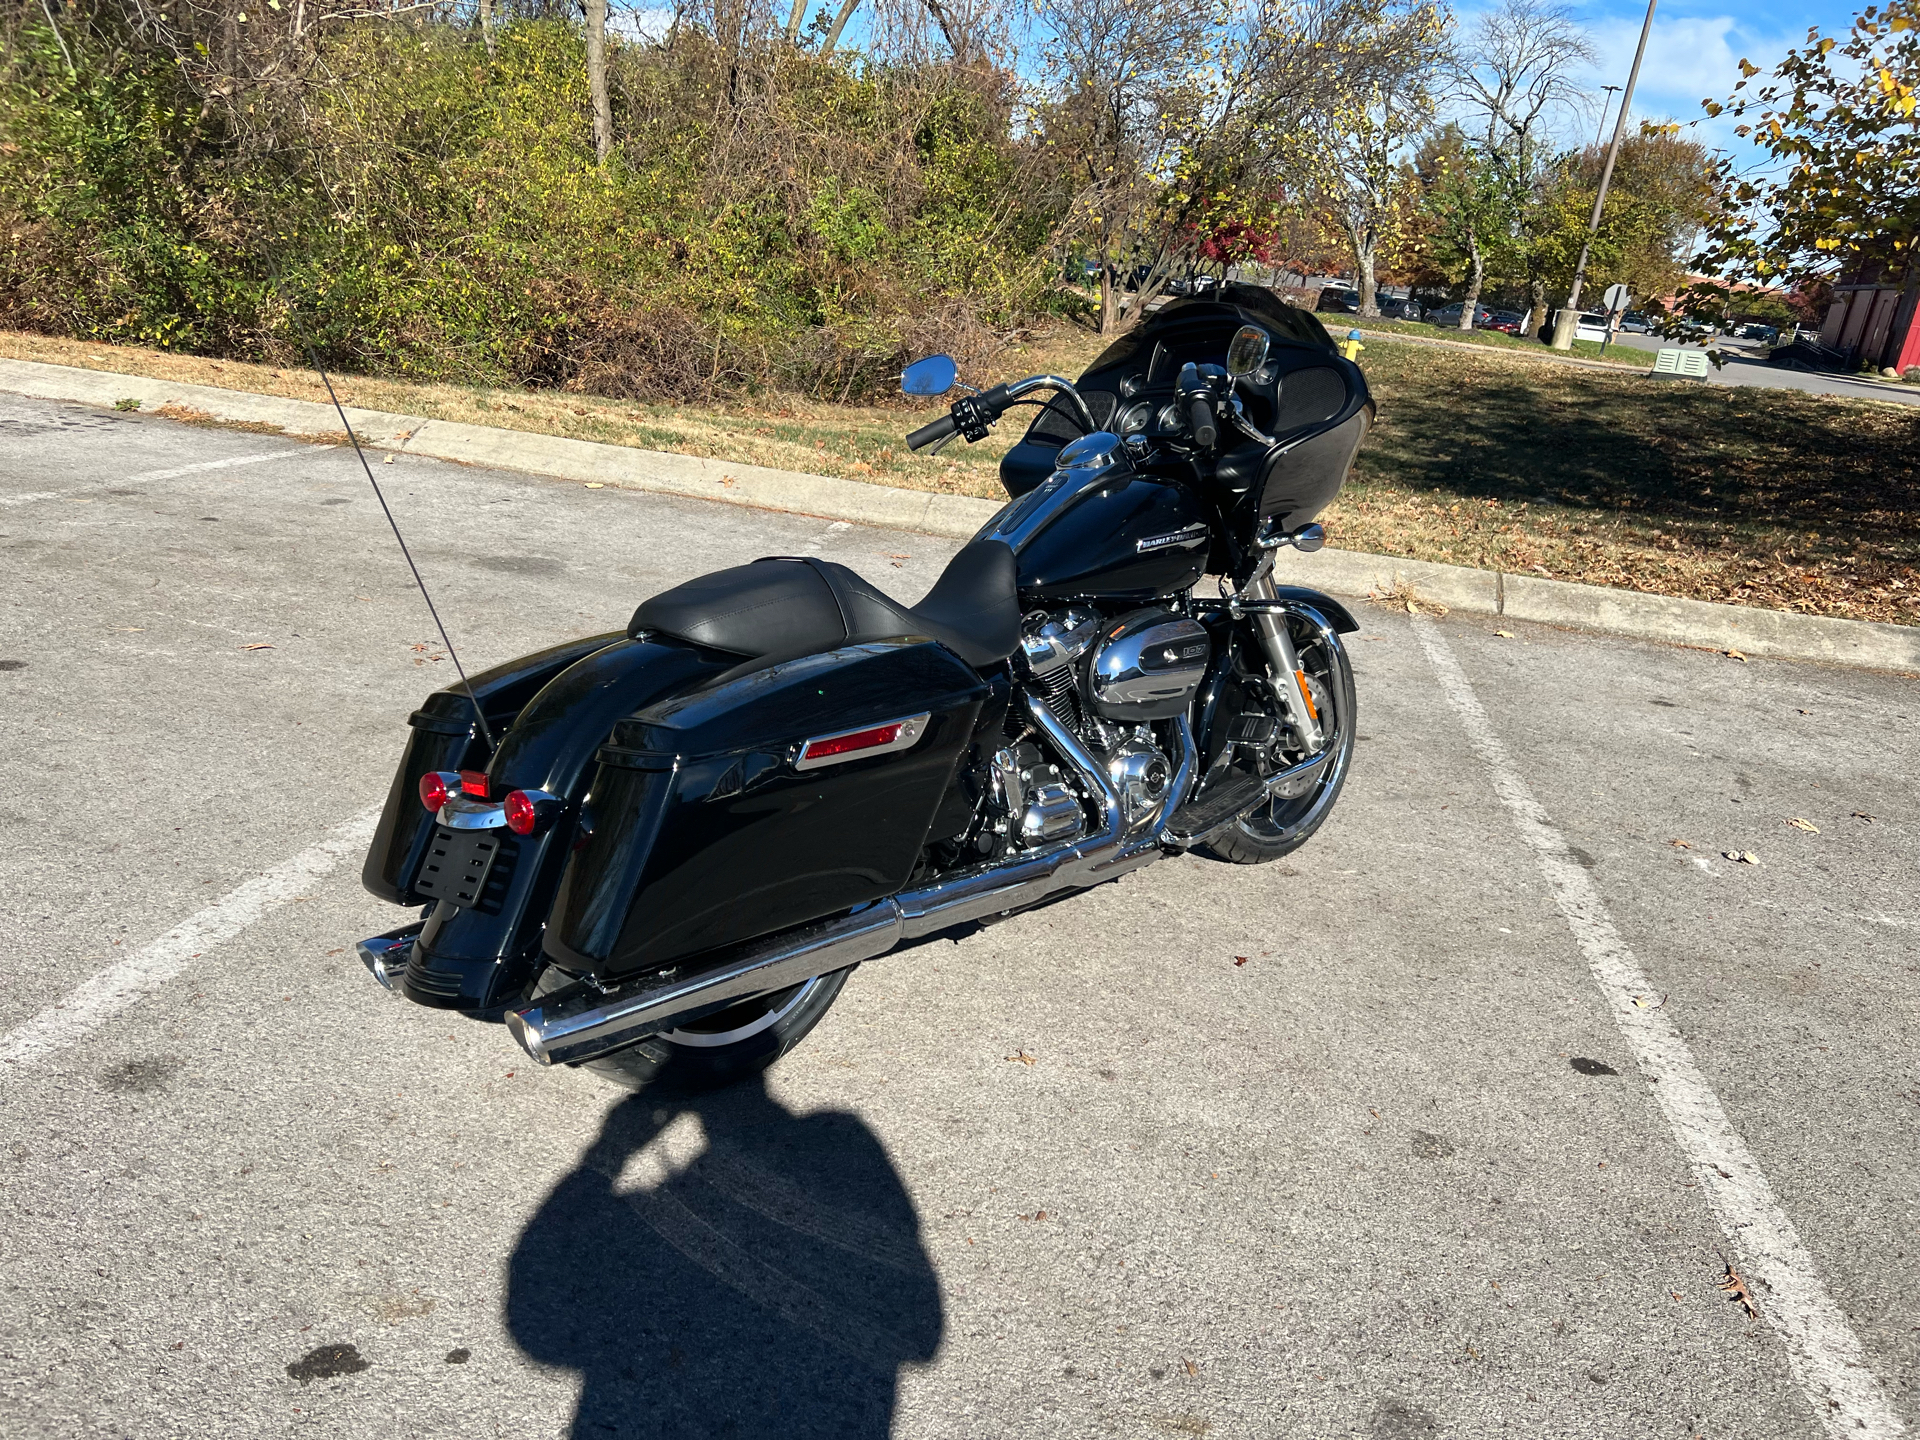 2023 Harley-Davidson Road Glide® in Franklin, Tennessee - Photo 13